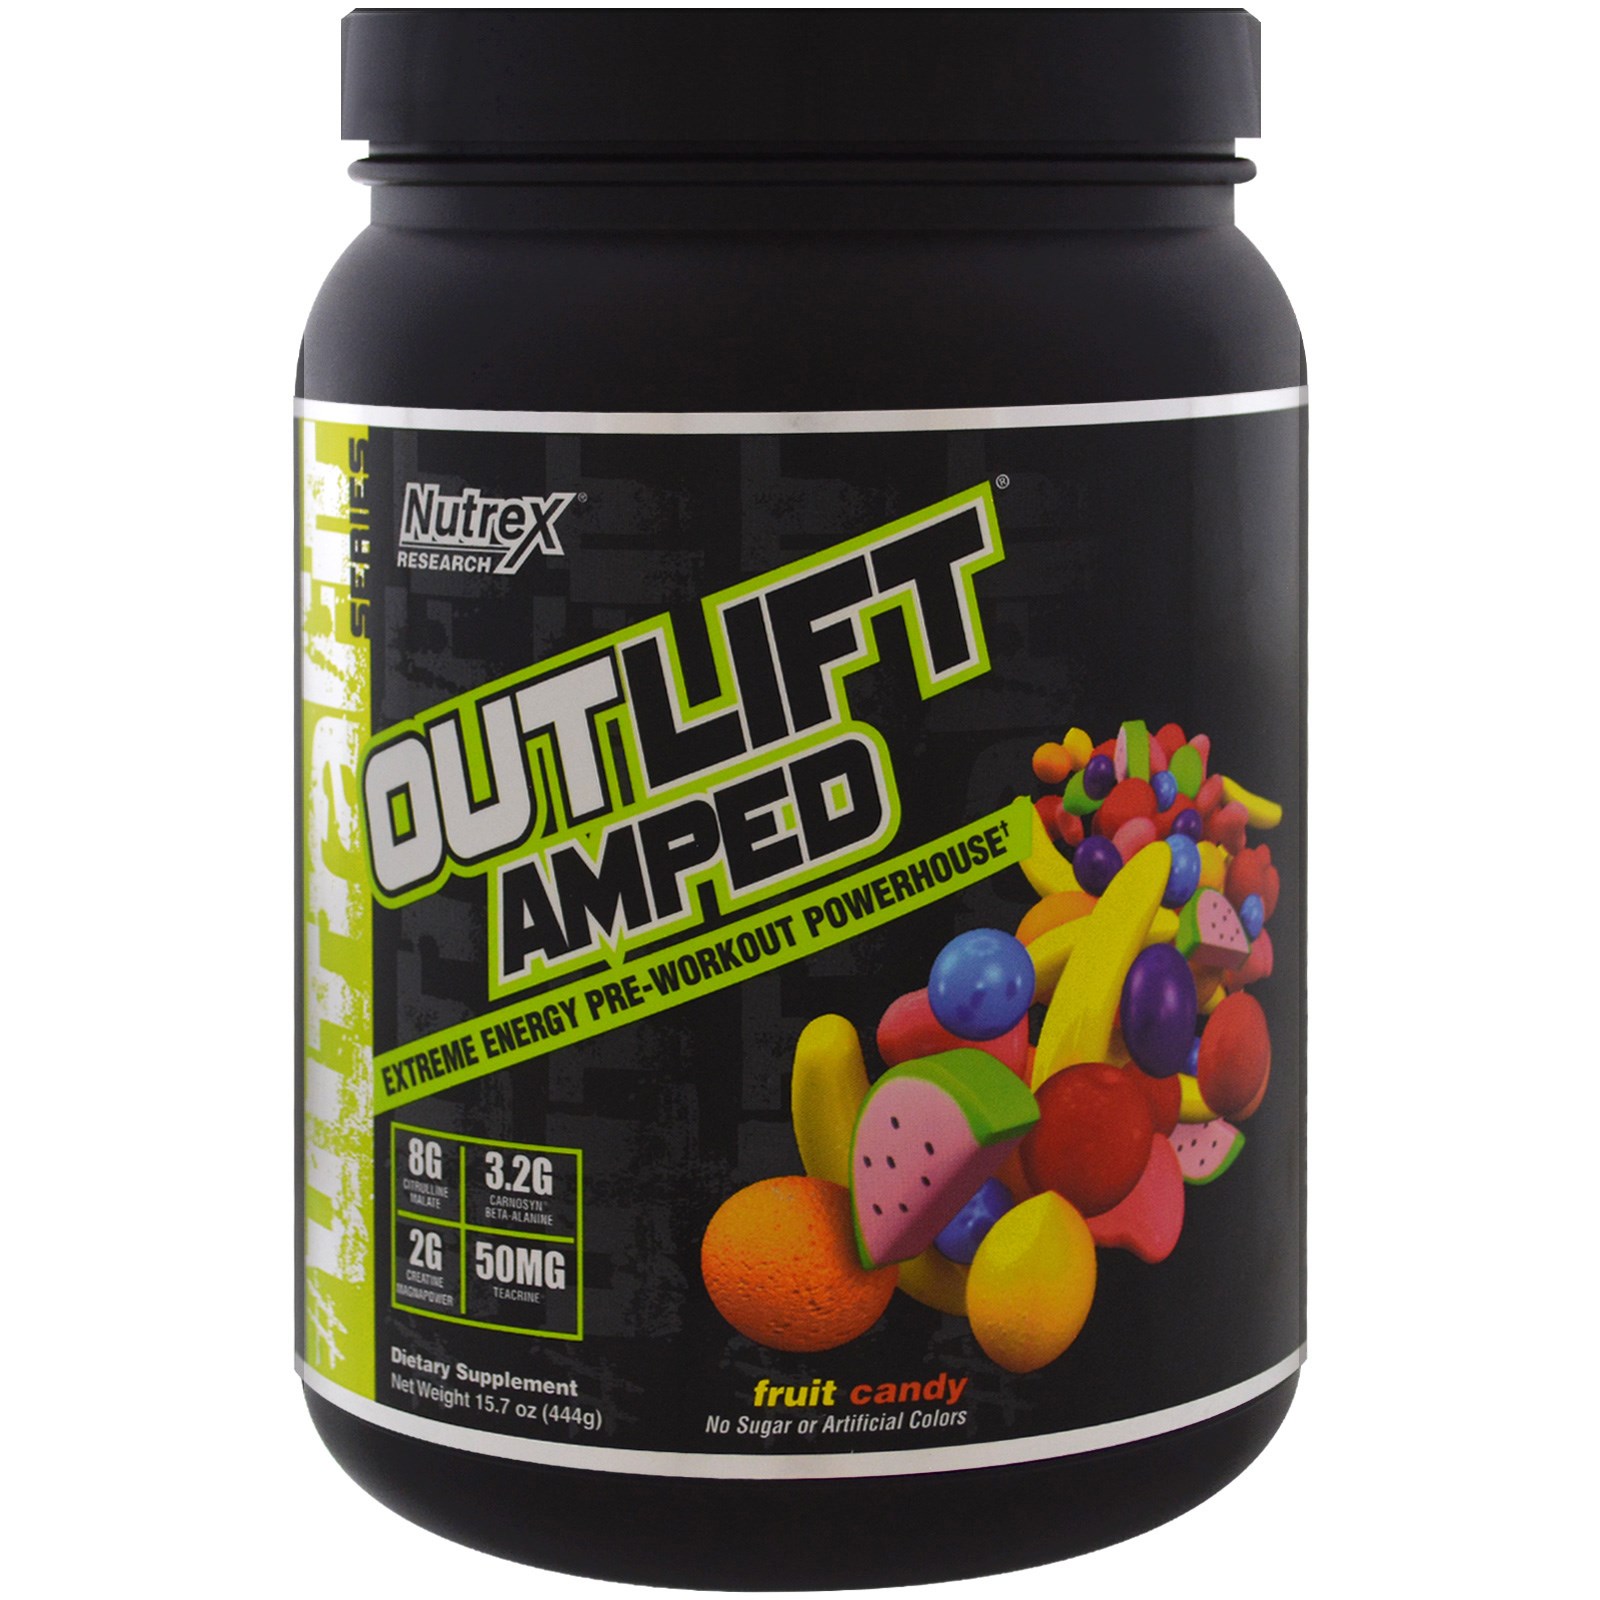 30 Minute Amped pre workout review for Weight Loss